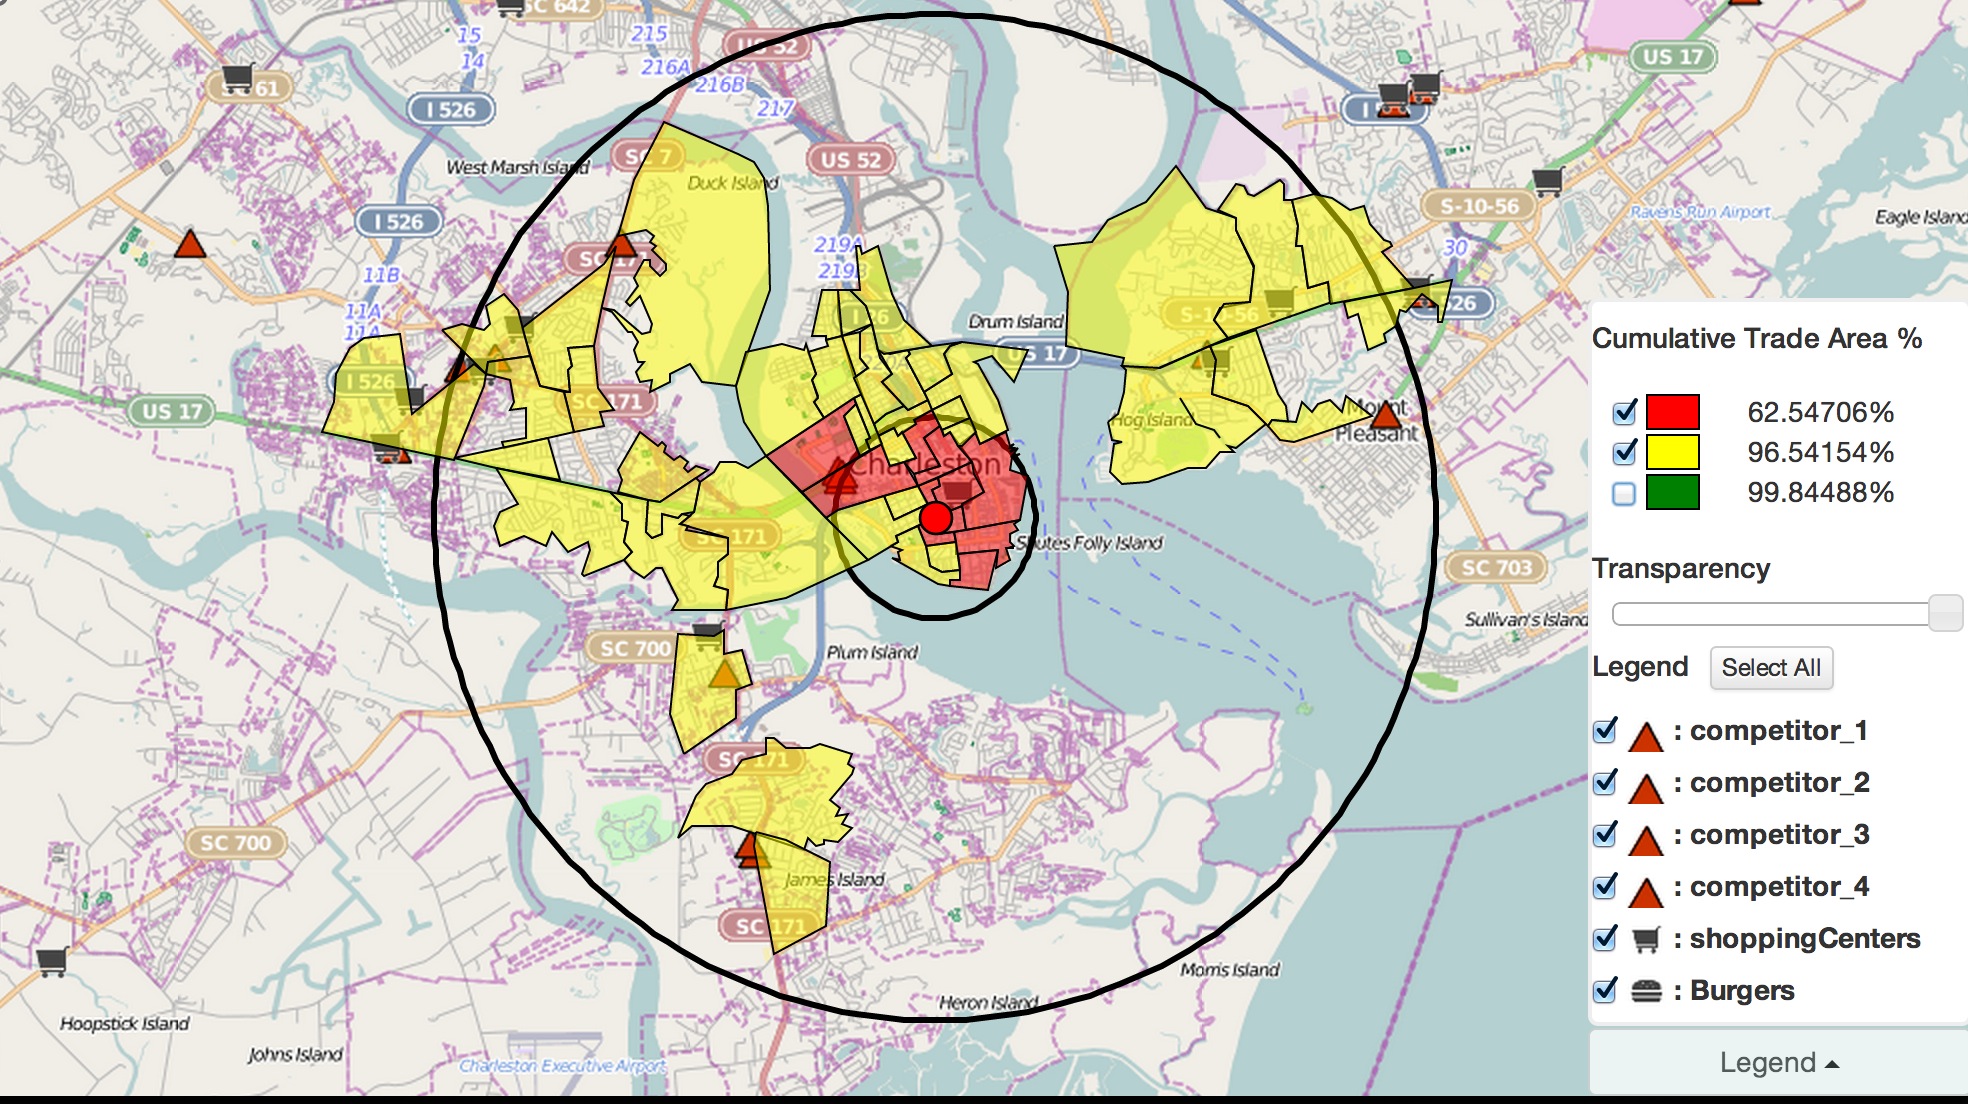 Using Spatial Data to Profile Customers